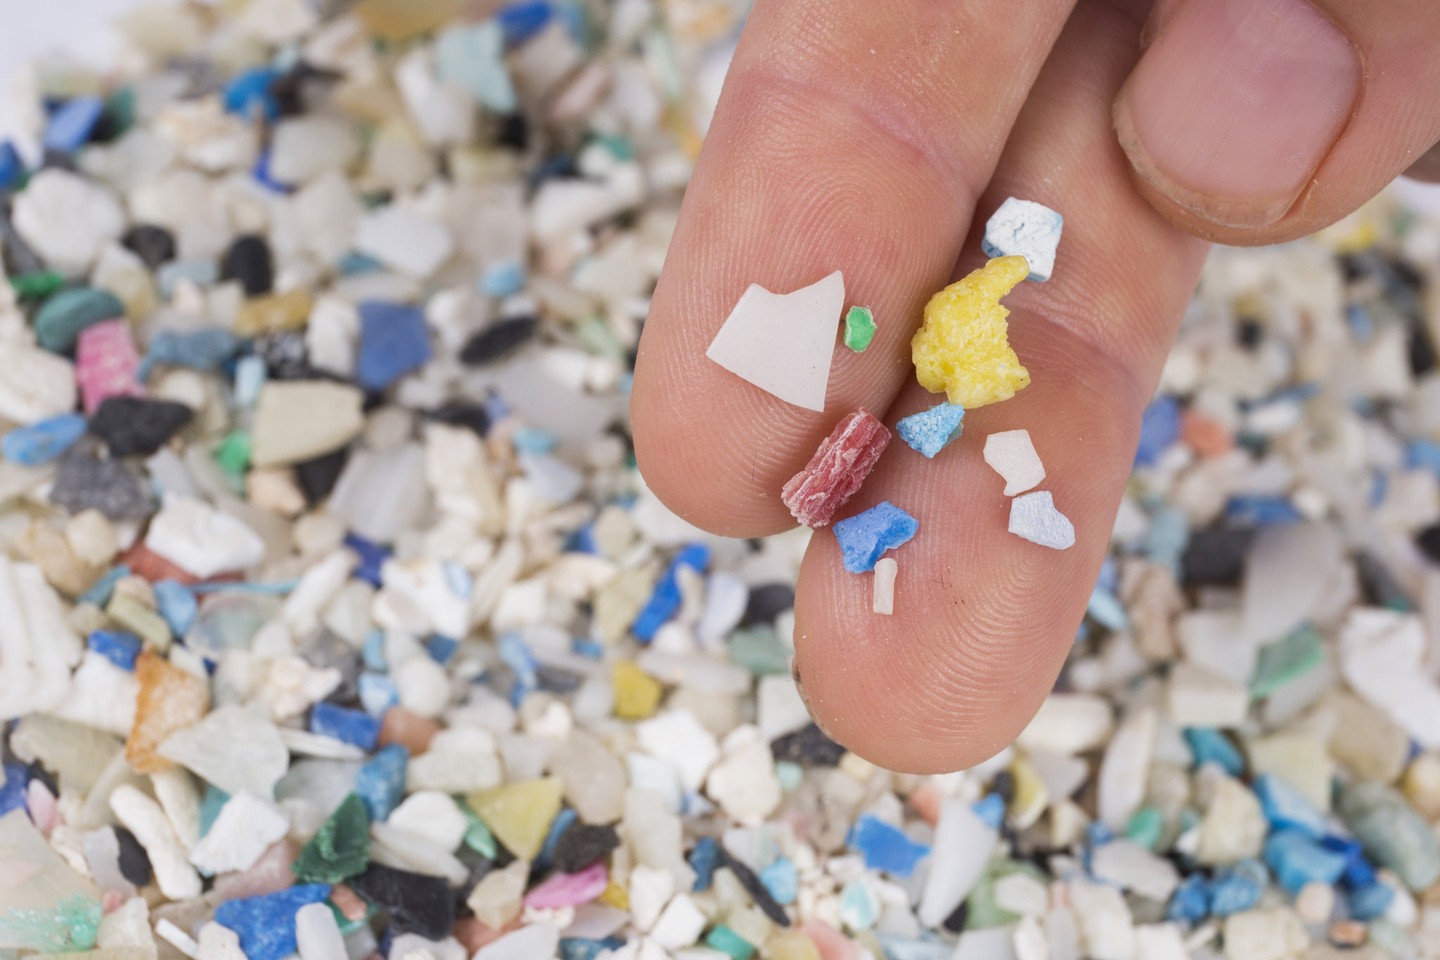 Microplastics Have Just Been Discovered In Humans For The First Time...